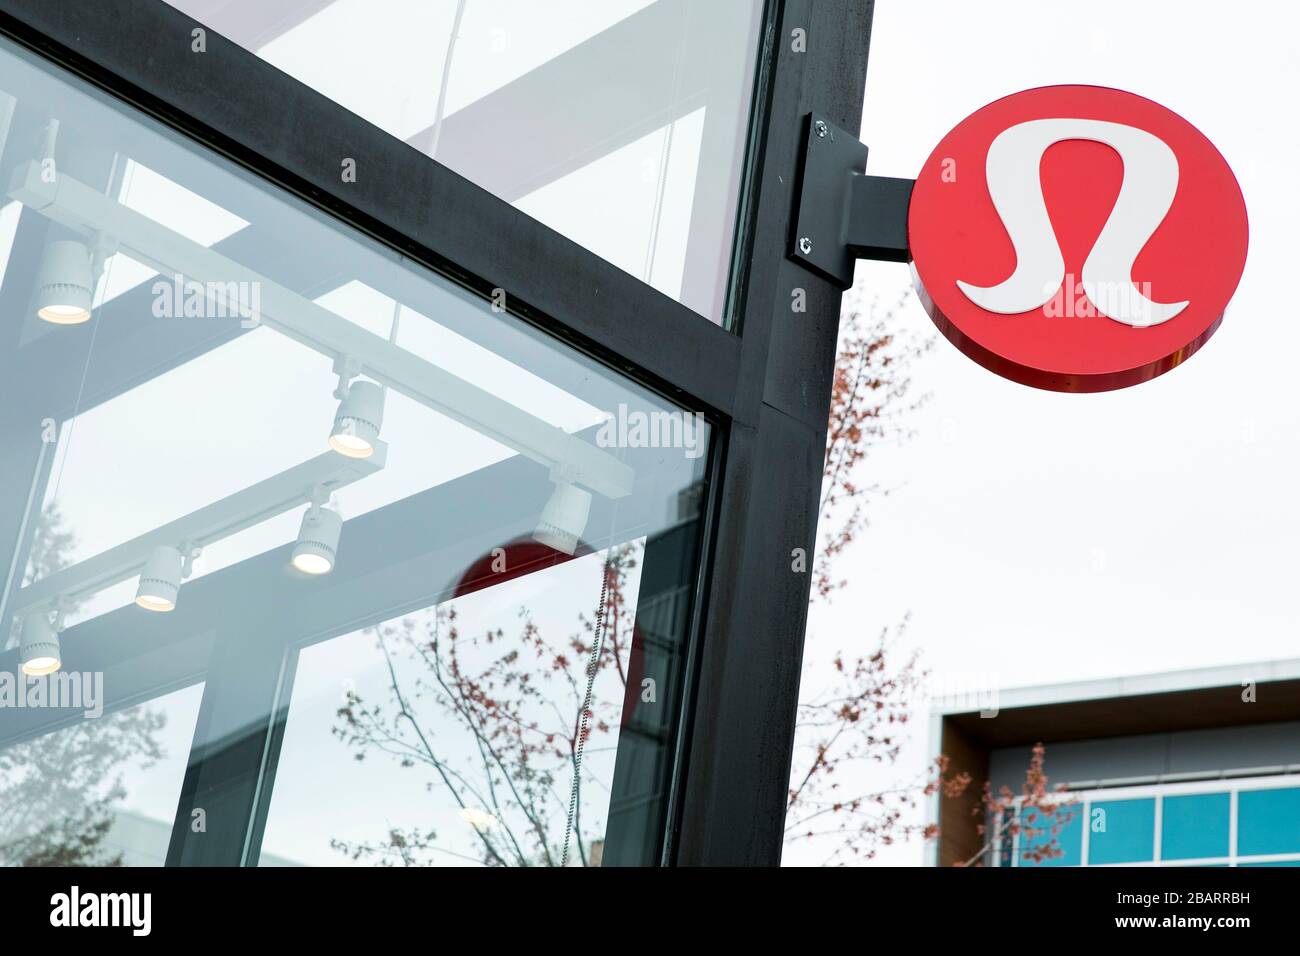 https://c8.alamy.com/comp/2BARRBH/a-logo-sign-outside-of-a-lululemon-athletica-retail-store-location-in-fairfax-virginia-on-march-22-2020-2BARRBH.jpg